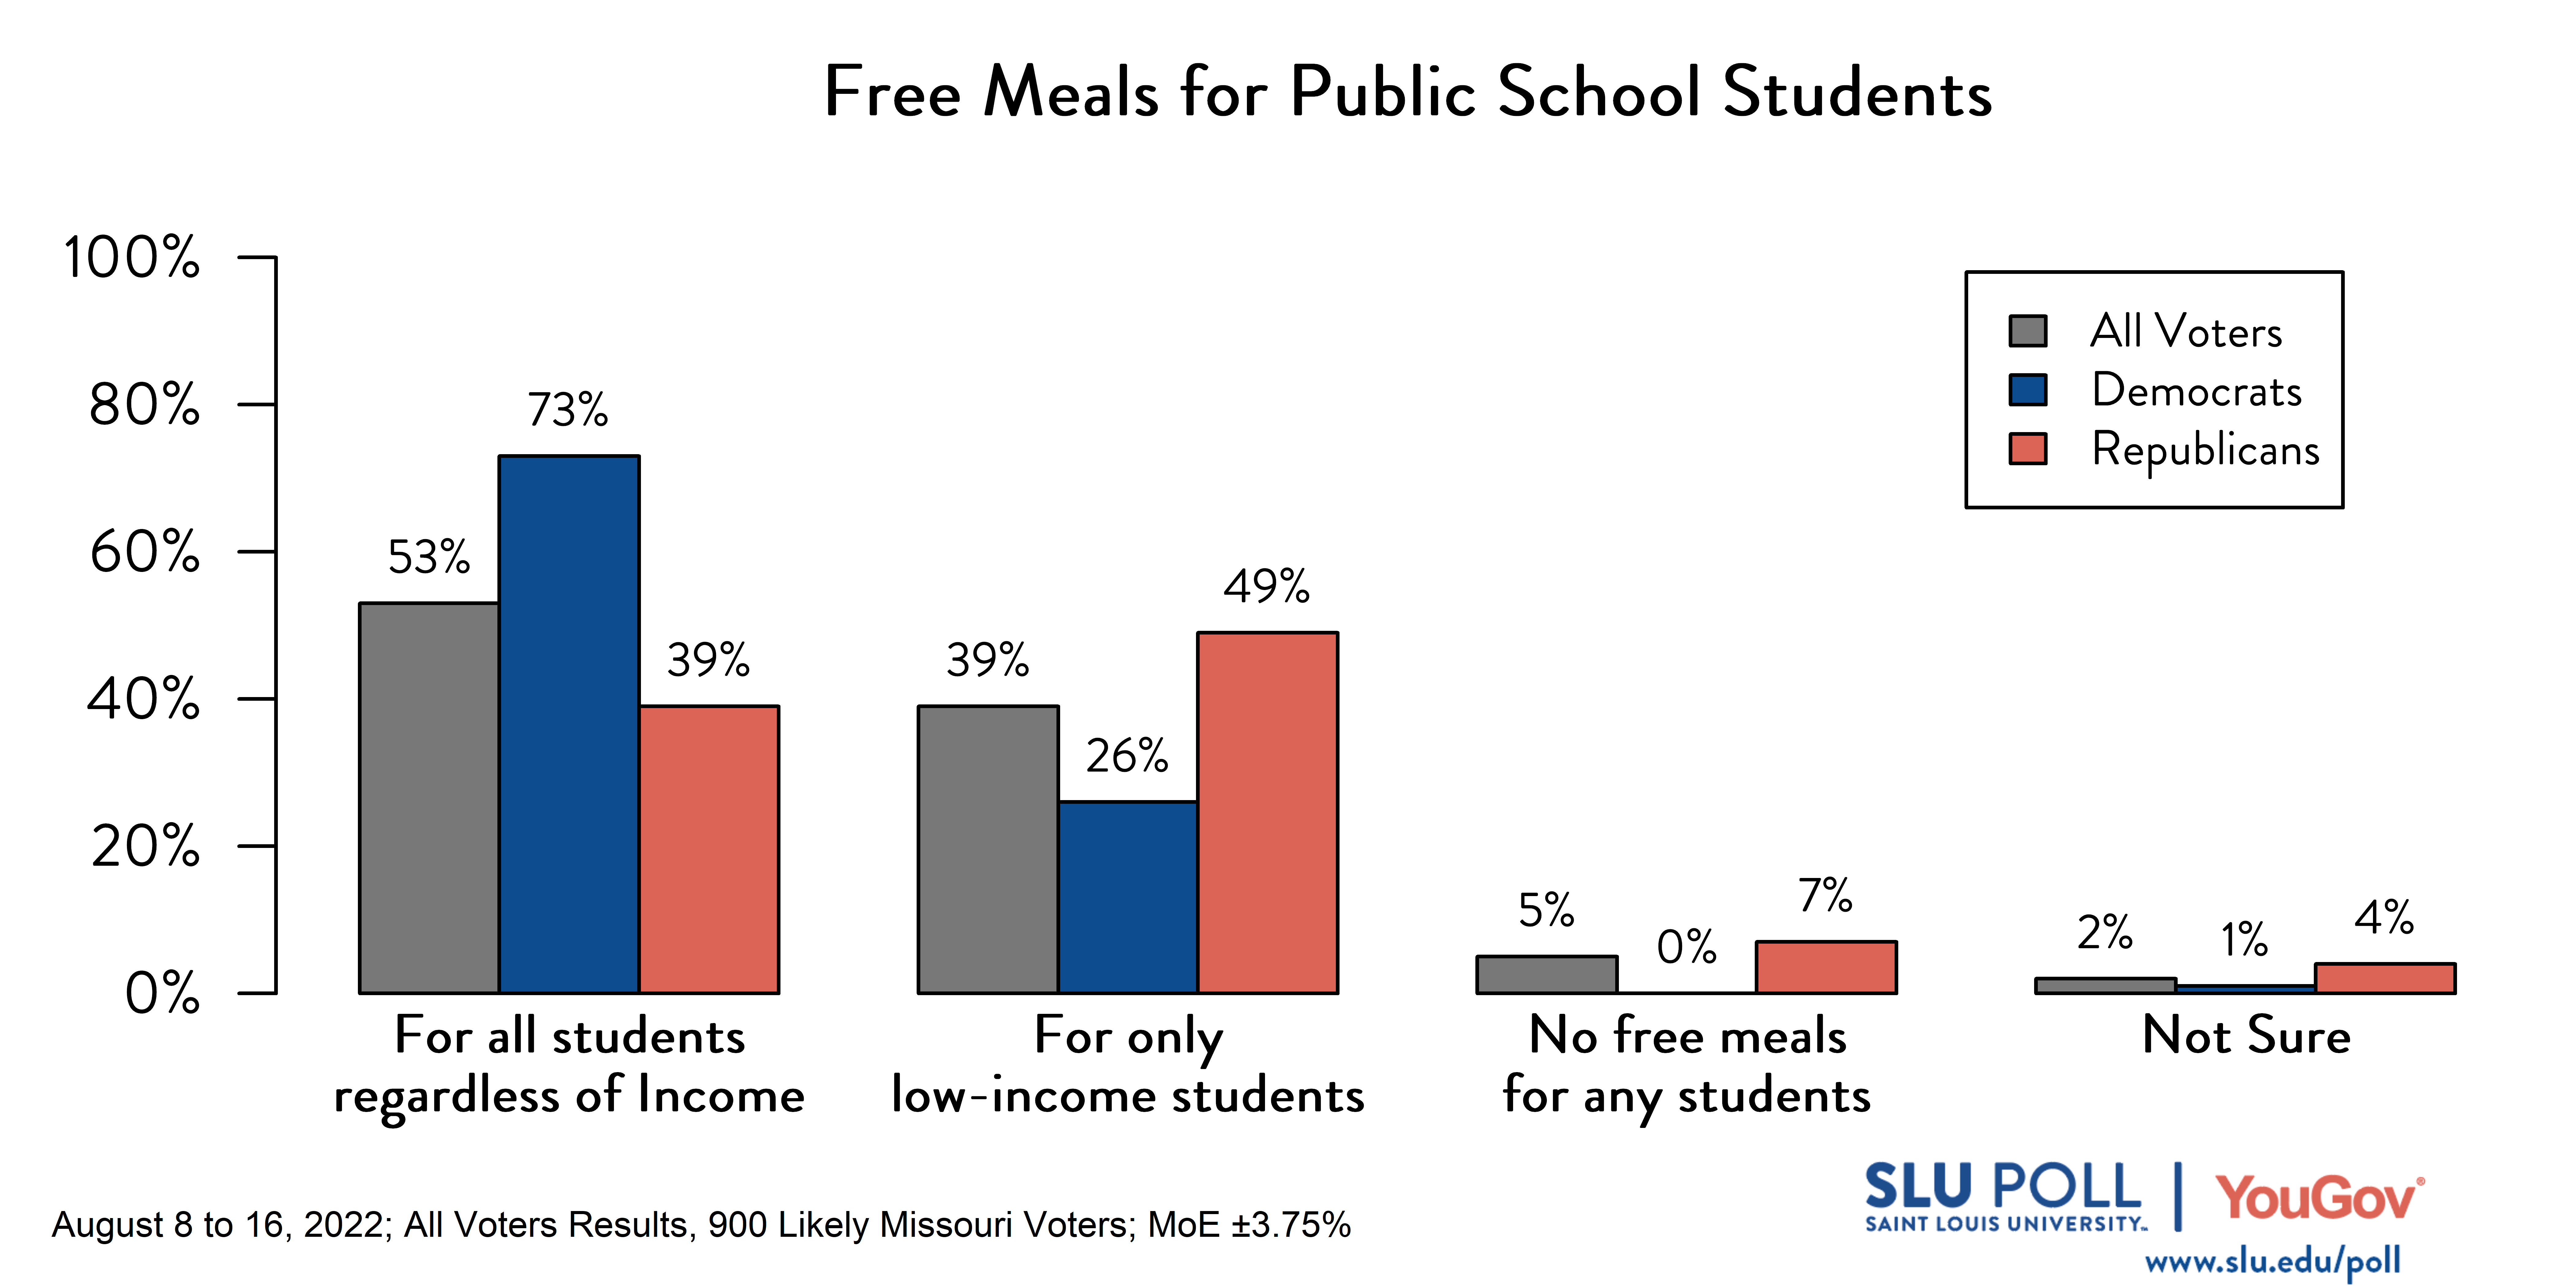 Likely voters' responses to 'Amid the COVID-19 pandemic, schools have been provided federal funding to provide free meals to all public school students. Previously, free meals were only provided to low-income students. Which approach do you support?': 53% Free meals for all students, regardless of income, 39% Free meals only for low-income students, 5% No free meals for any students, and 2% Not sure. Democratic voters' responses: ' 73% Free meals for all students, regardless of income, 26% Free meals only for low-income students, 0% No free meals for any students, and 1% Not sure. Republican voters' responses: 39% Free meals for all students, regardless of income, 49% Free meals only for low-income students, 7% No free meals for any students, and 4% Not sure.